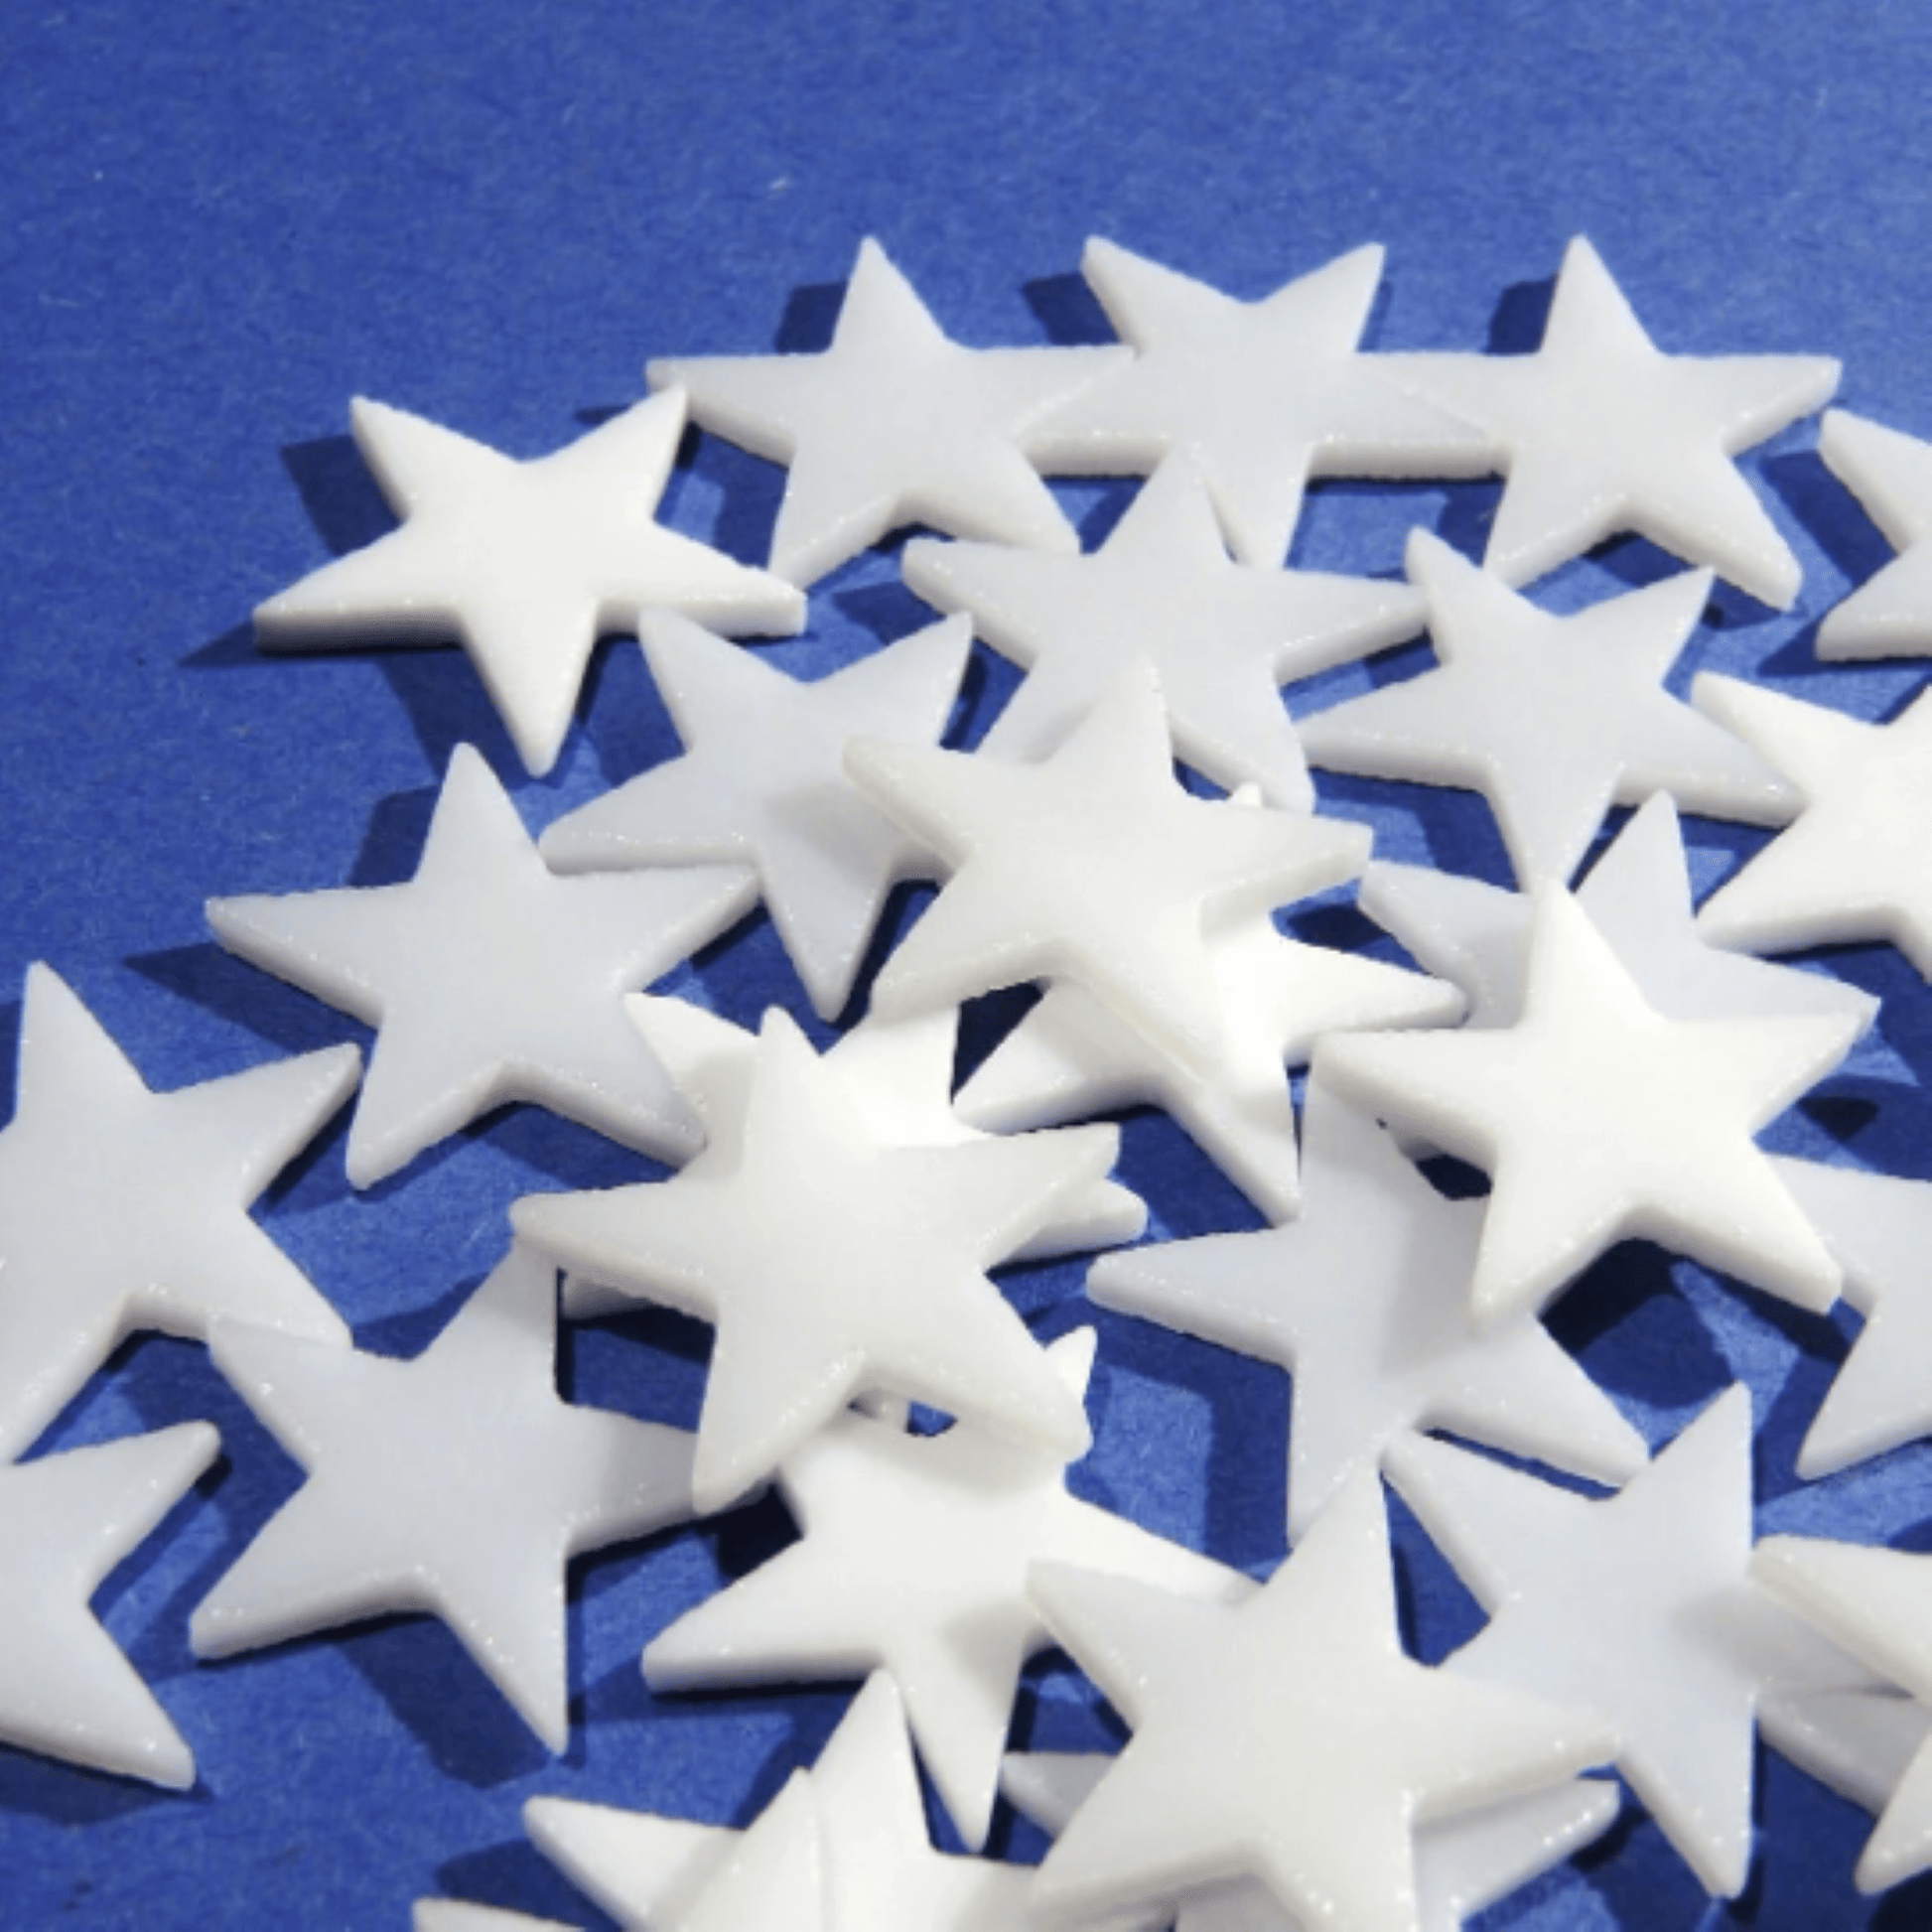 Precut Stained Glass Stars, 1" White Glass Stars 96 COE for Fusing, Mosaics, Jewelry, Stained Glass